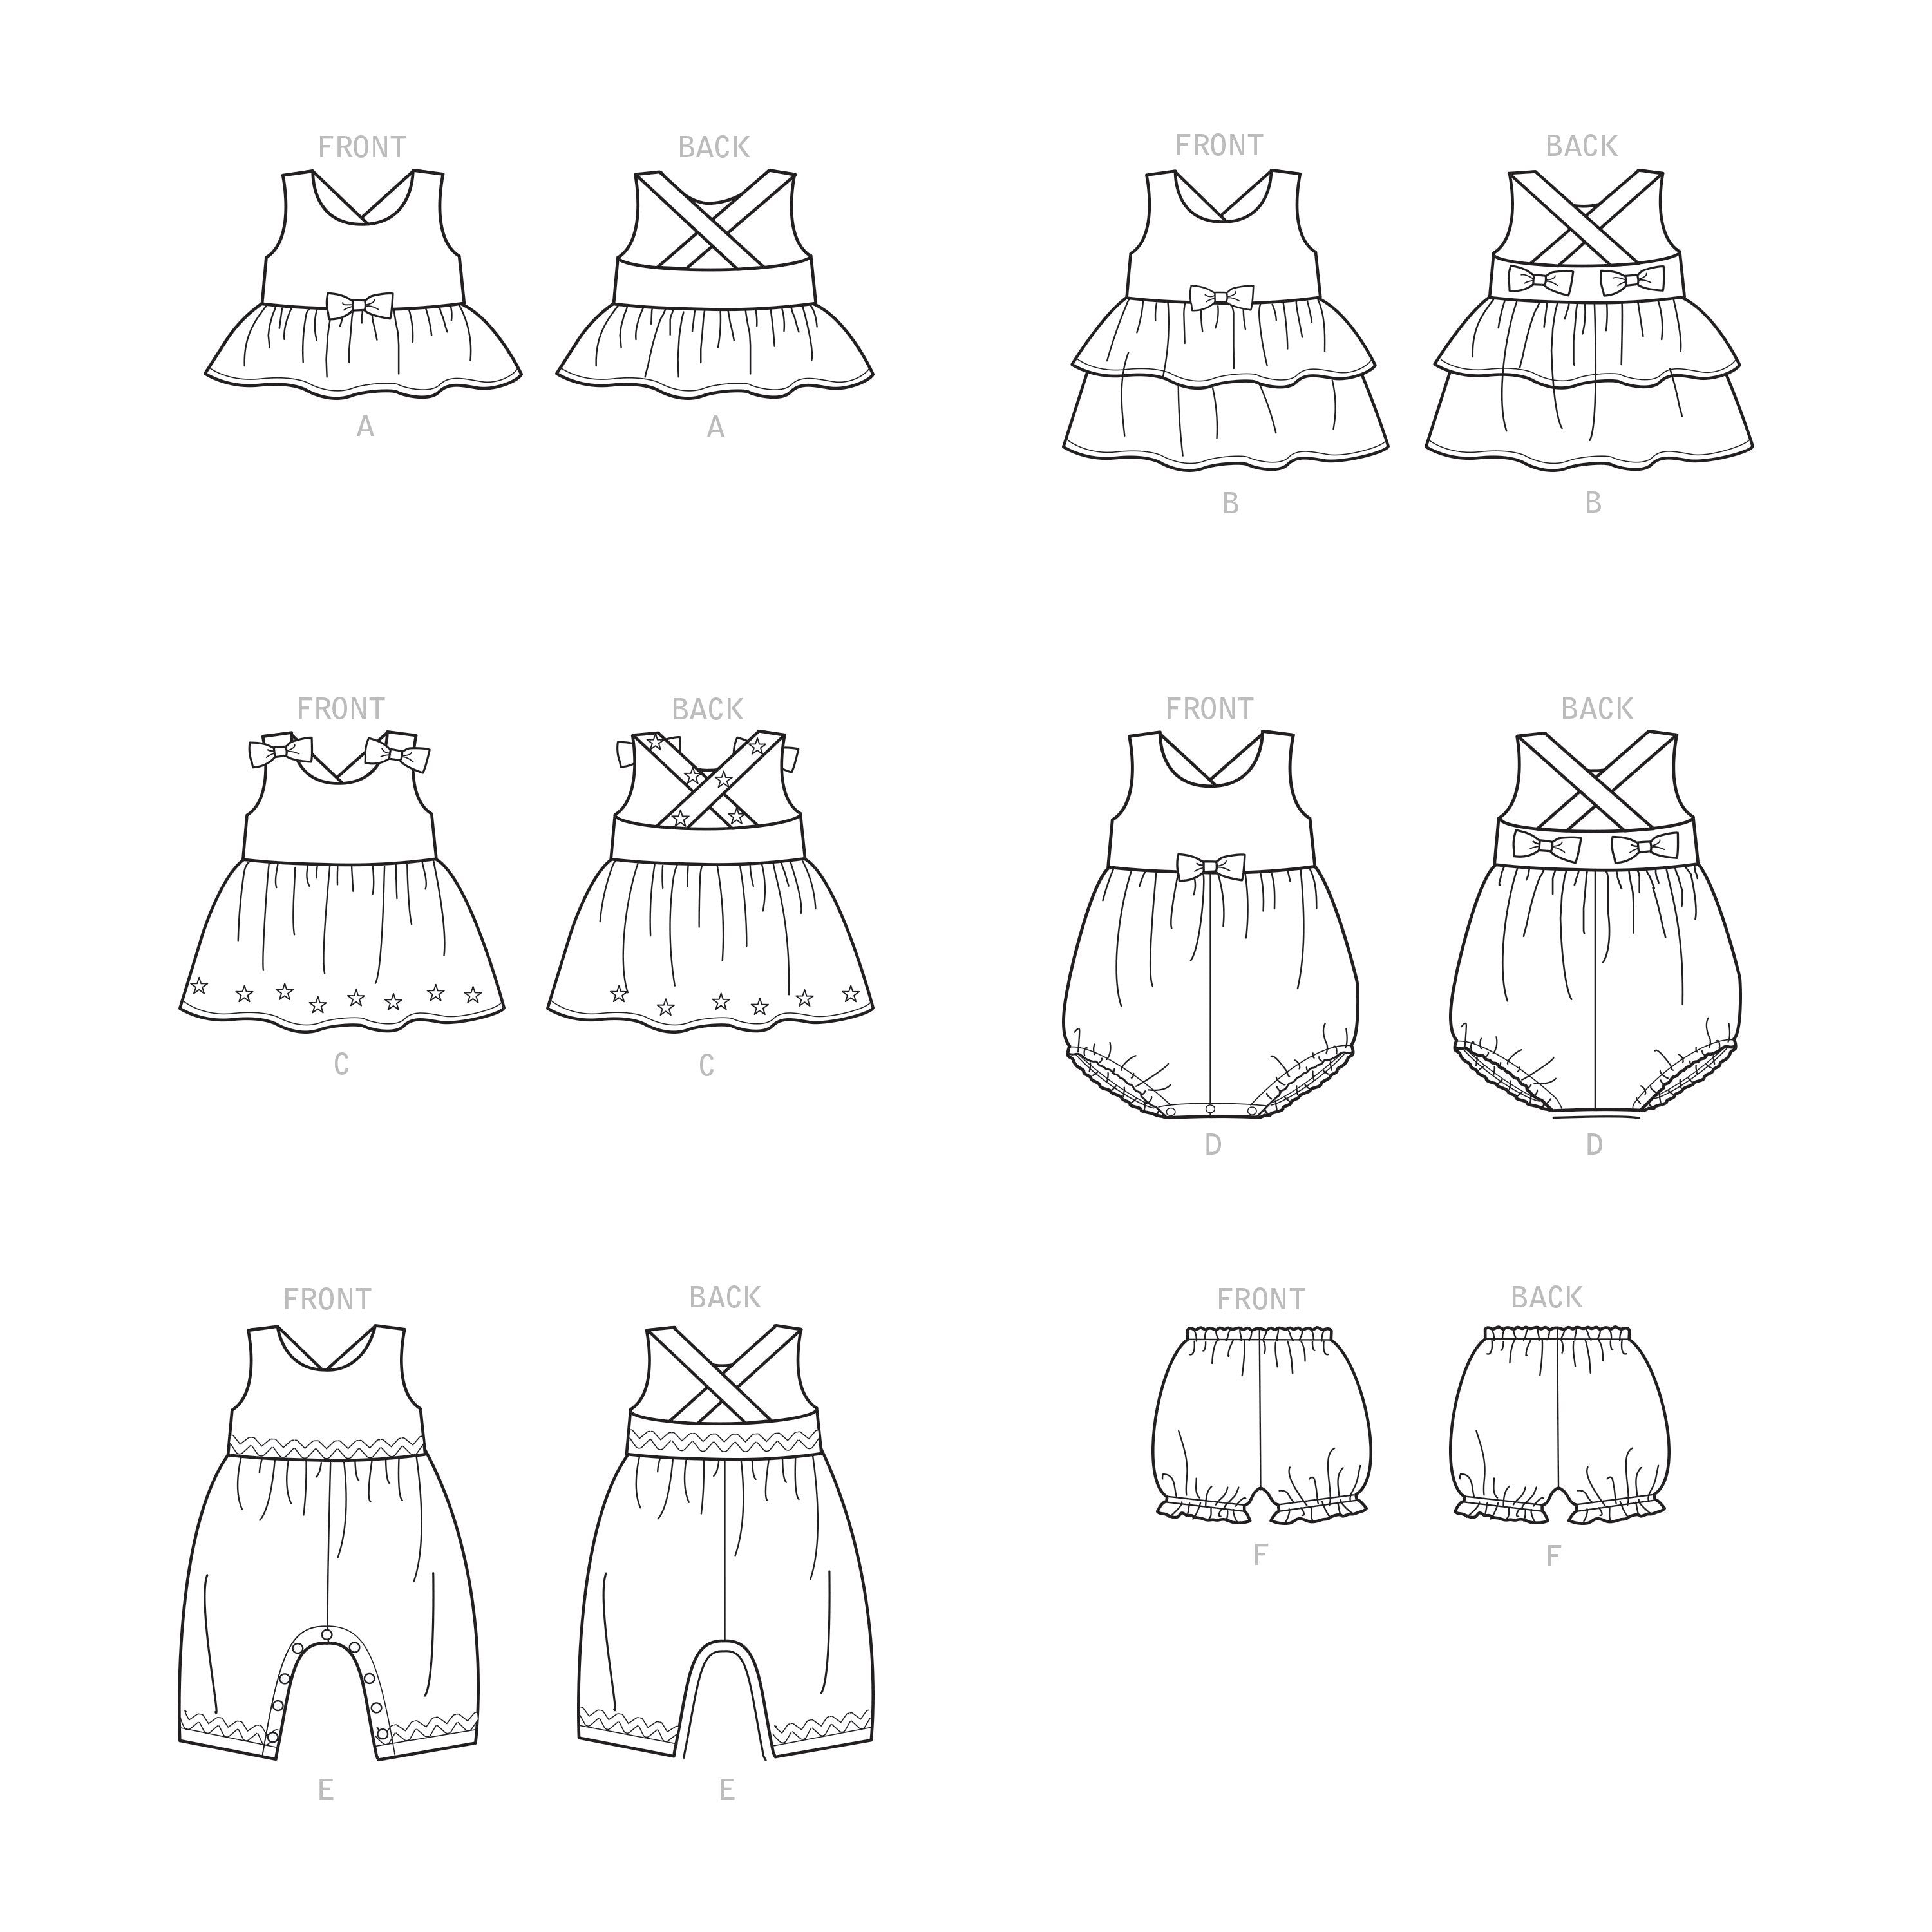 Simplicity Sewing Pattern S9319 Toddlers' Top, Dresses, Rompers from Jaycotts Sewing Supplies